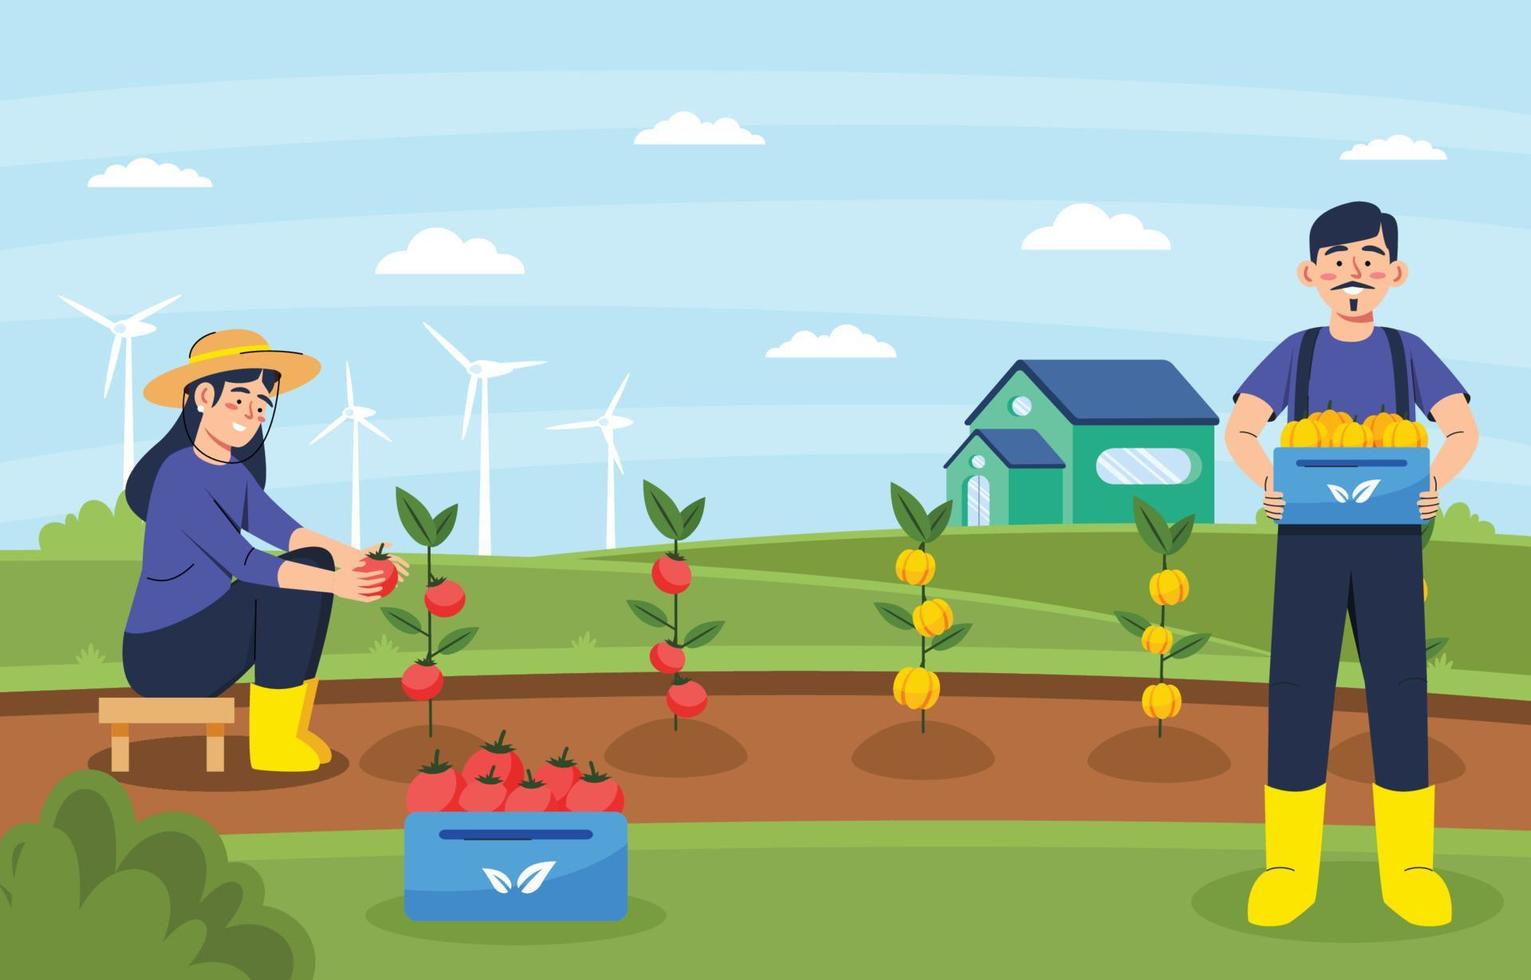 Harvesting Food From Home Concept vector